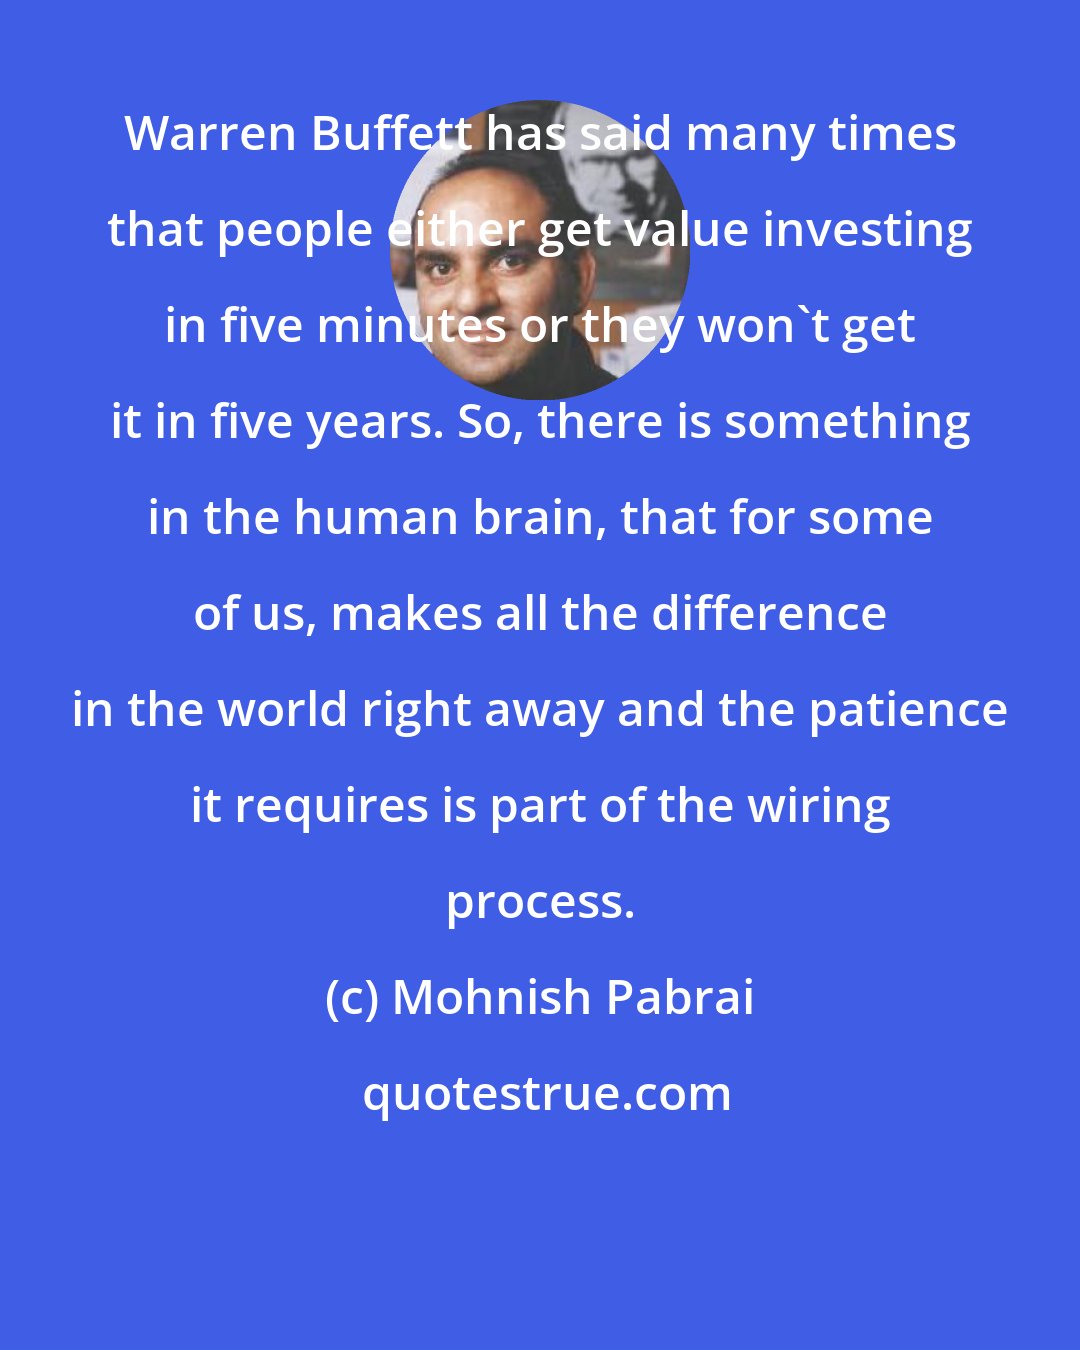 Mohnish Pabrai: Warren Buffett has said many times that people either get value investing in five minutes or they won't get it in five years. So, there is something in the human brain, that for some of us, makes all the difference in the world right away and the patience it requires is part of the wiring process.